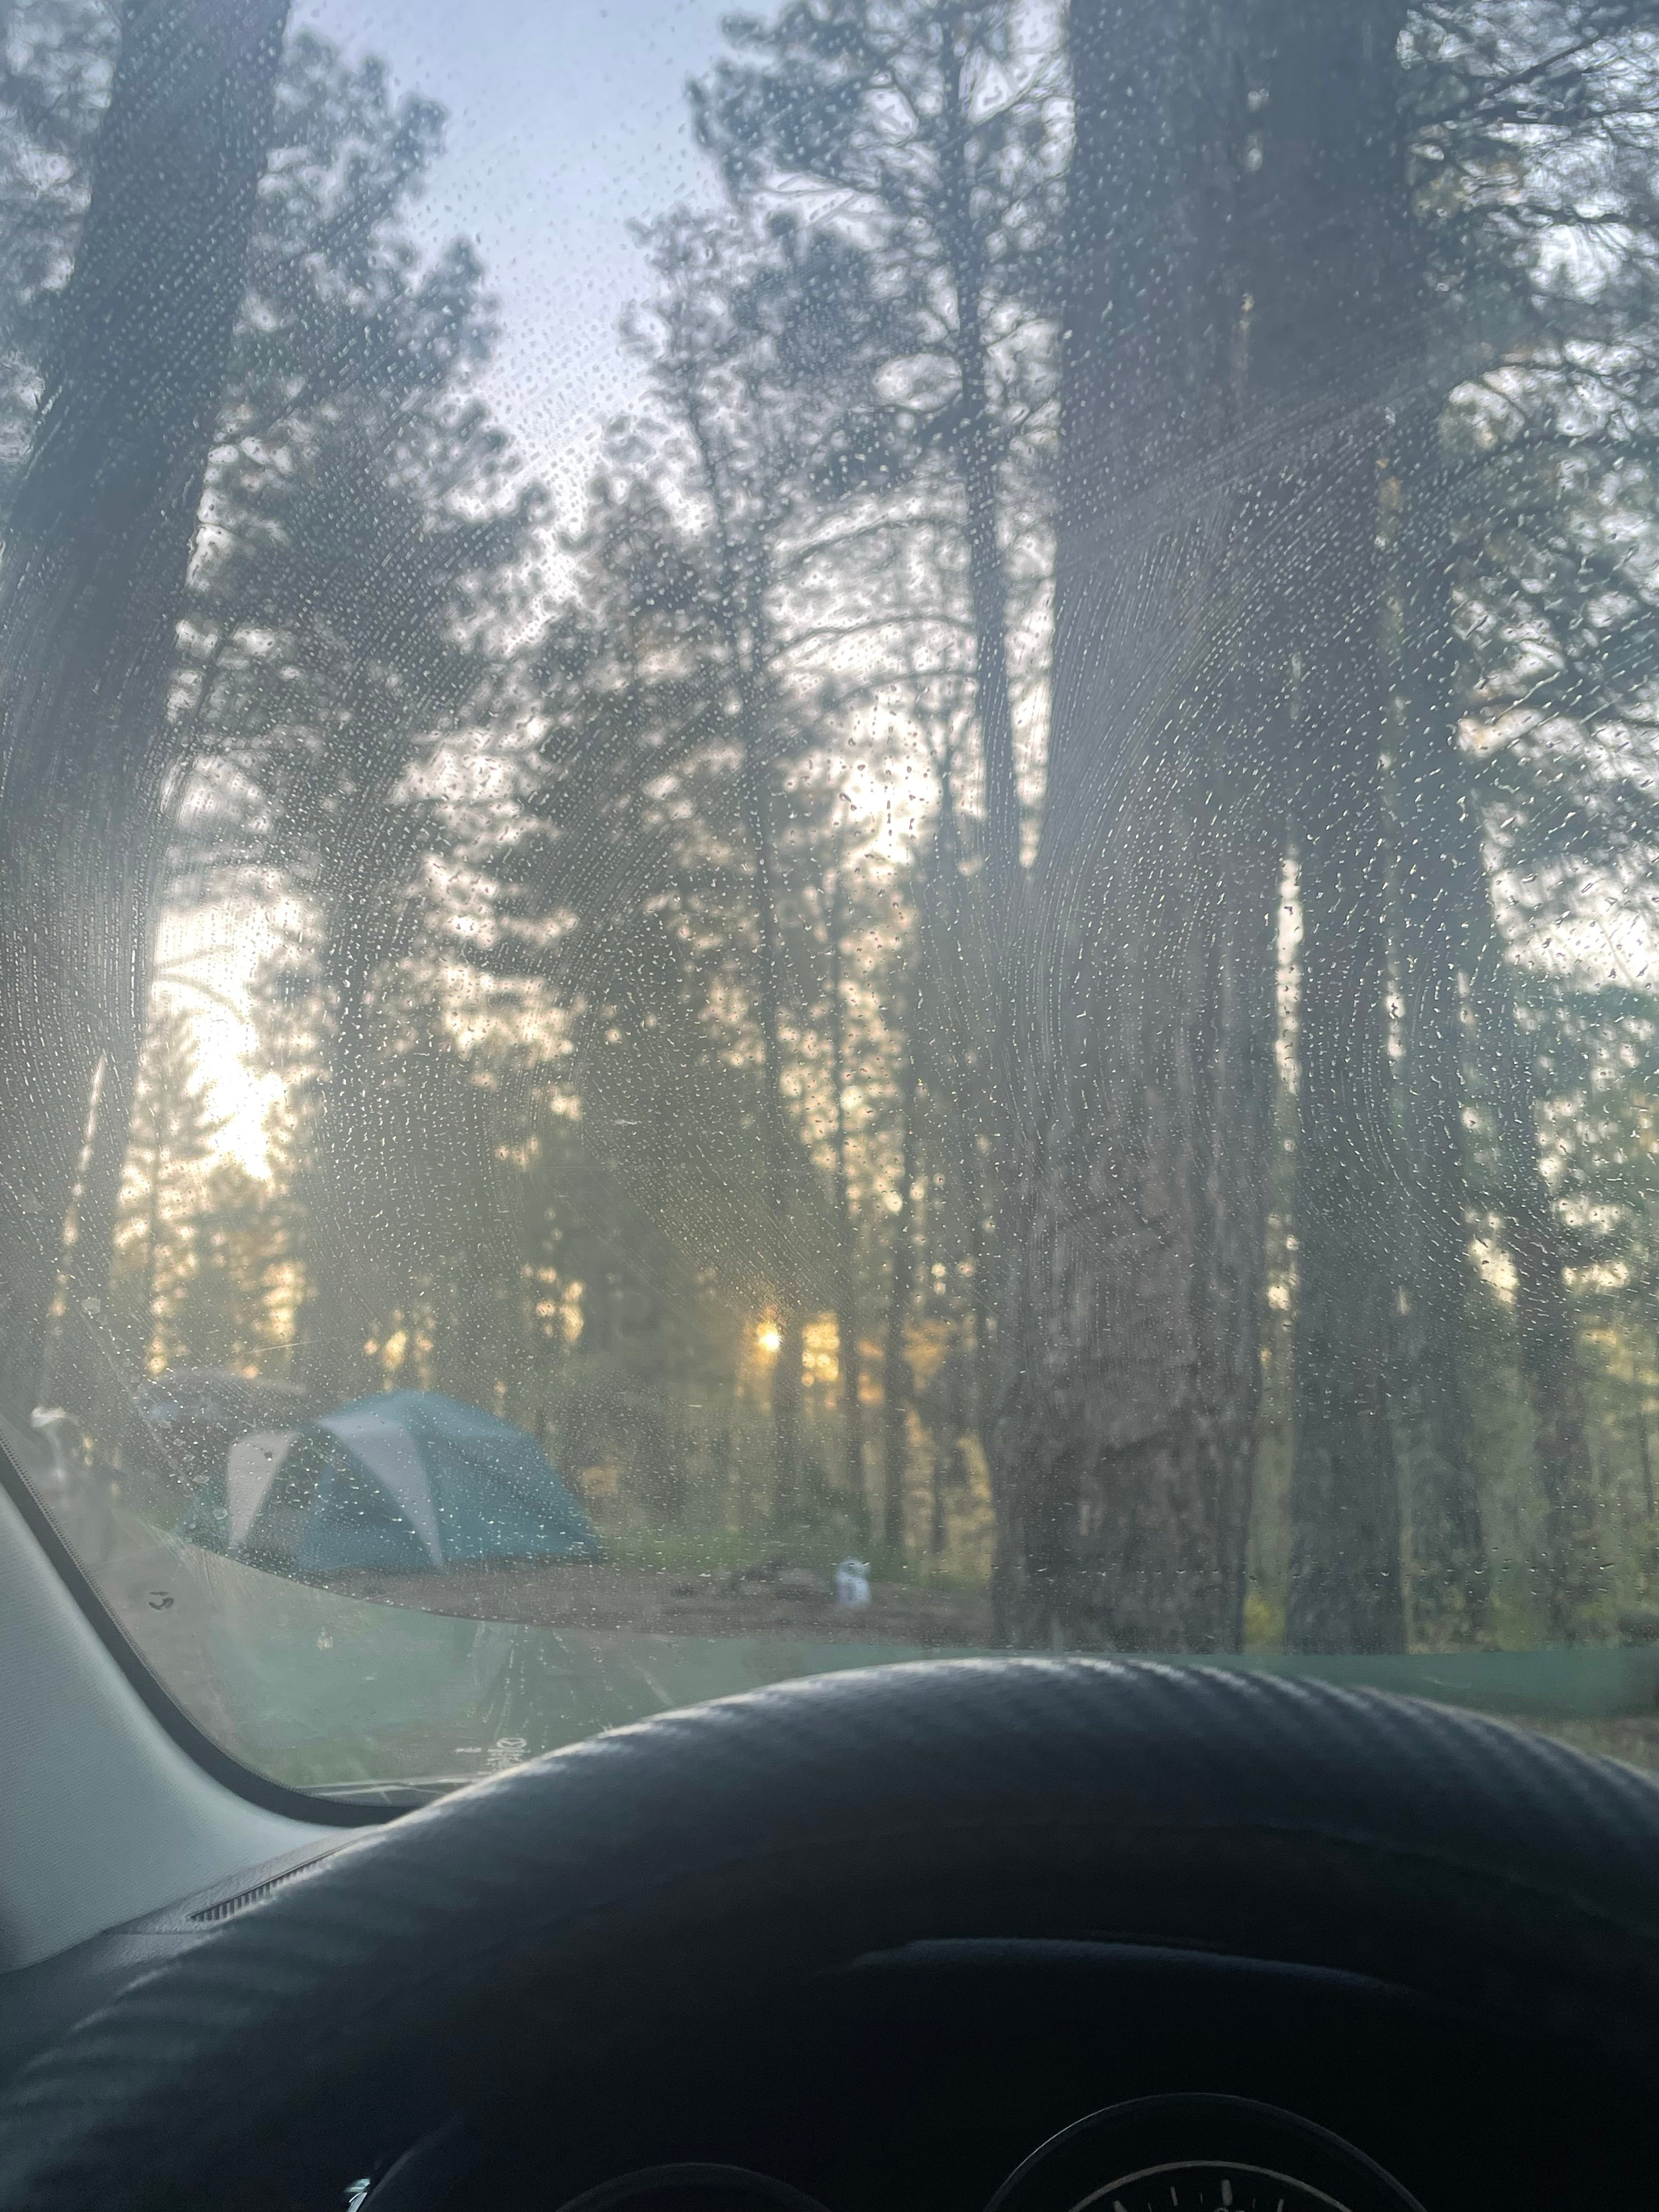 Camper submitted image from Pumphouse Wash - 1